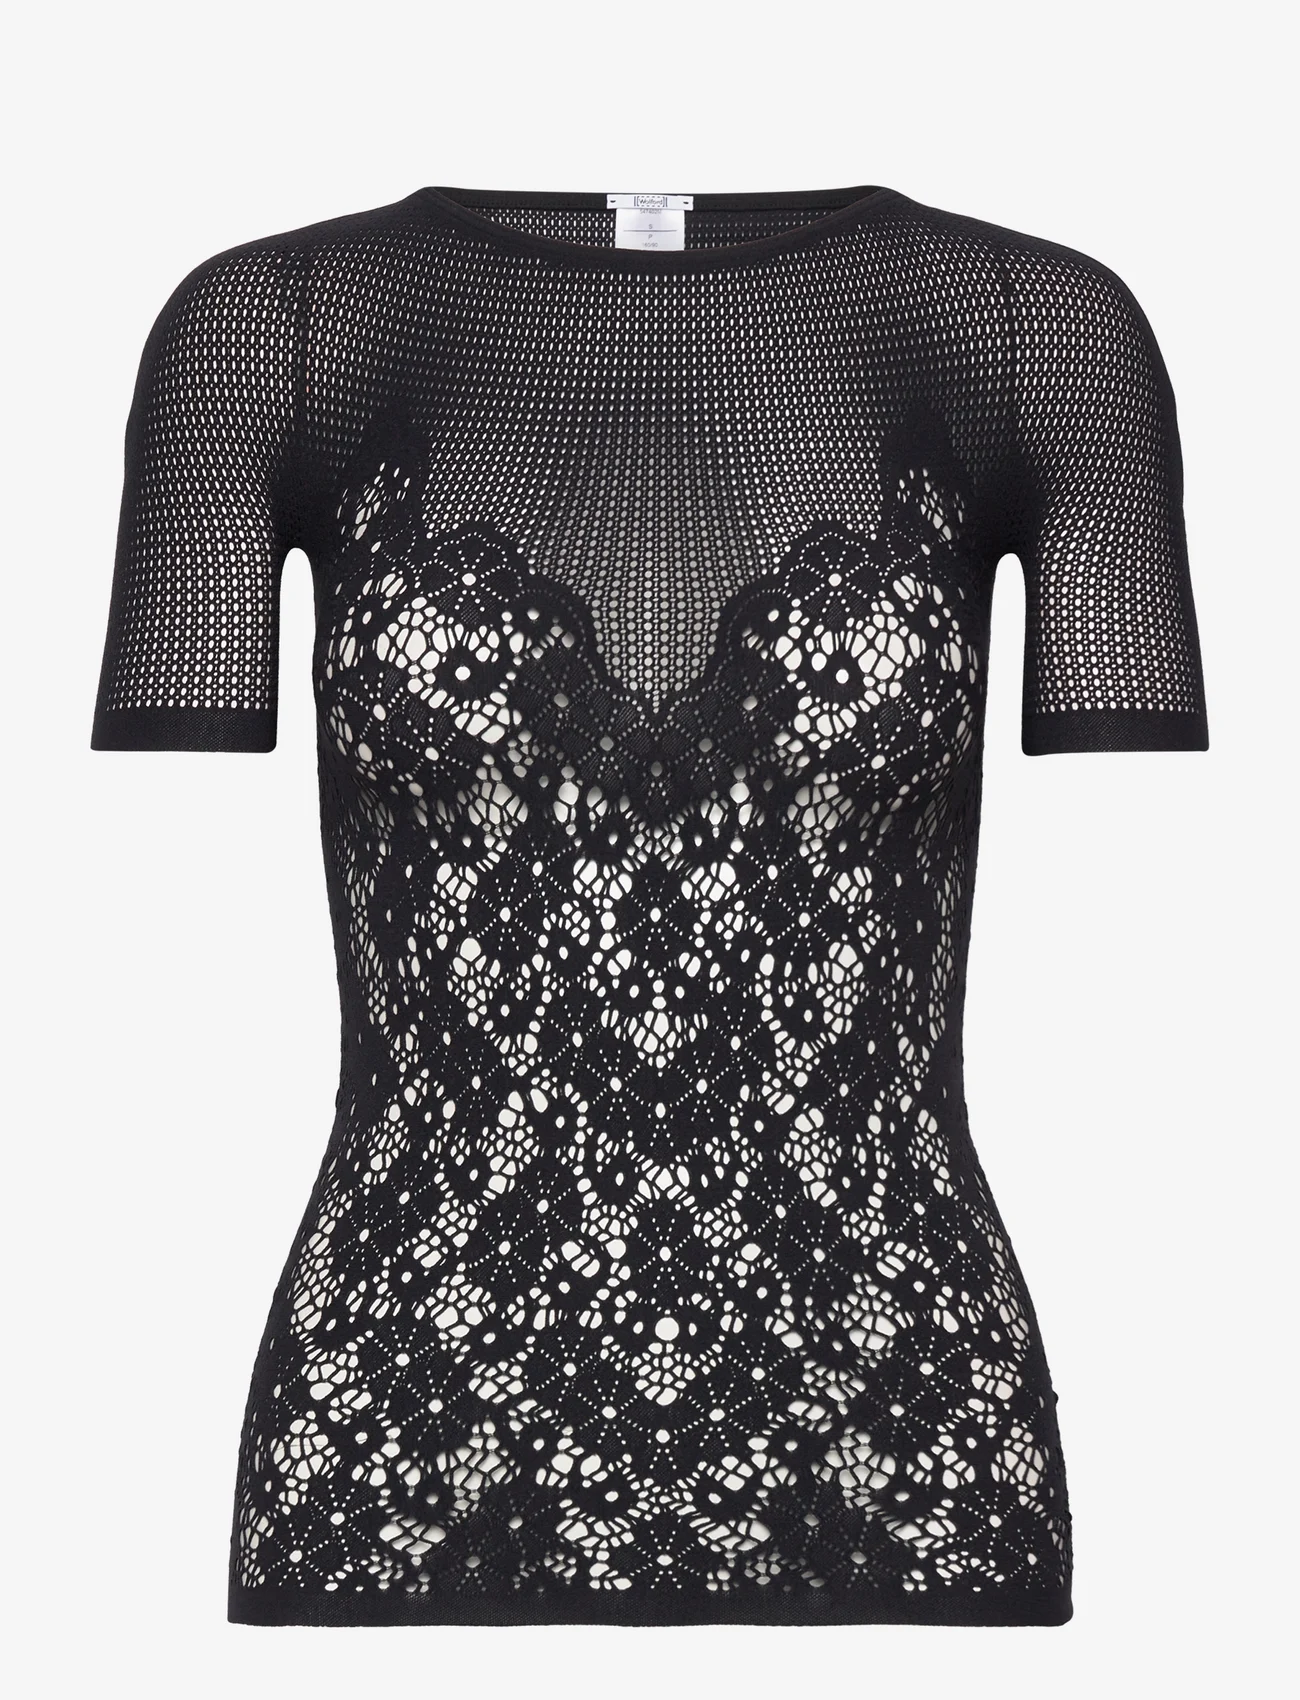 Wolford - Flower Lace Top Short Sleeves - lyhythihaiset puserot - black - 0